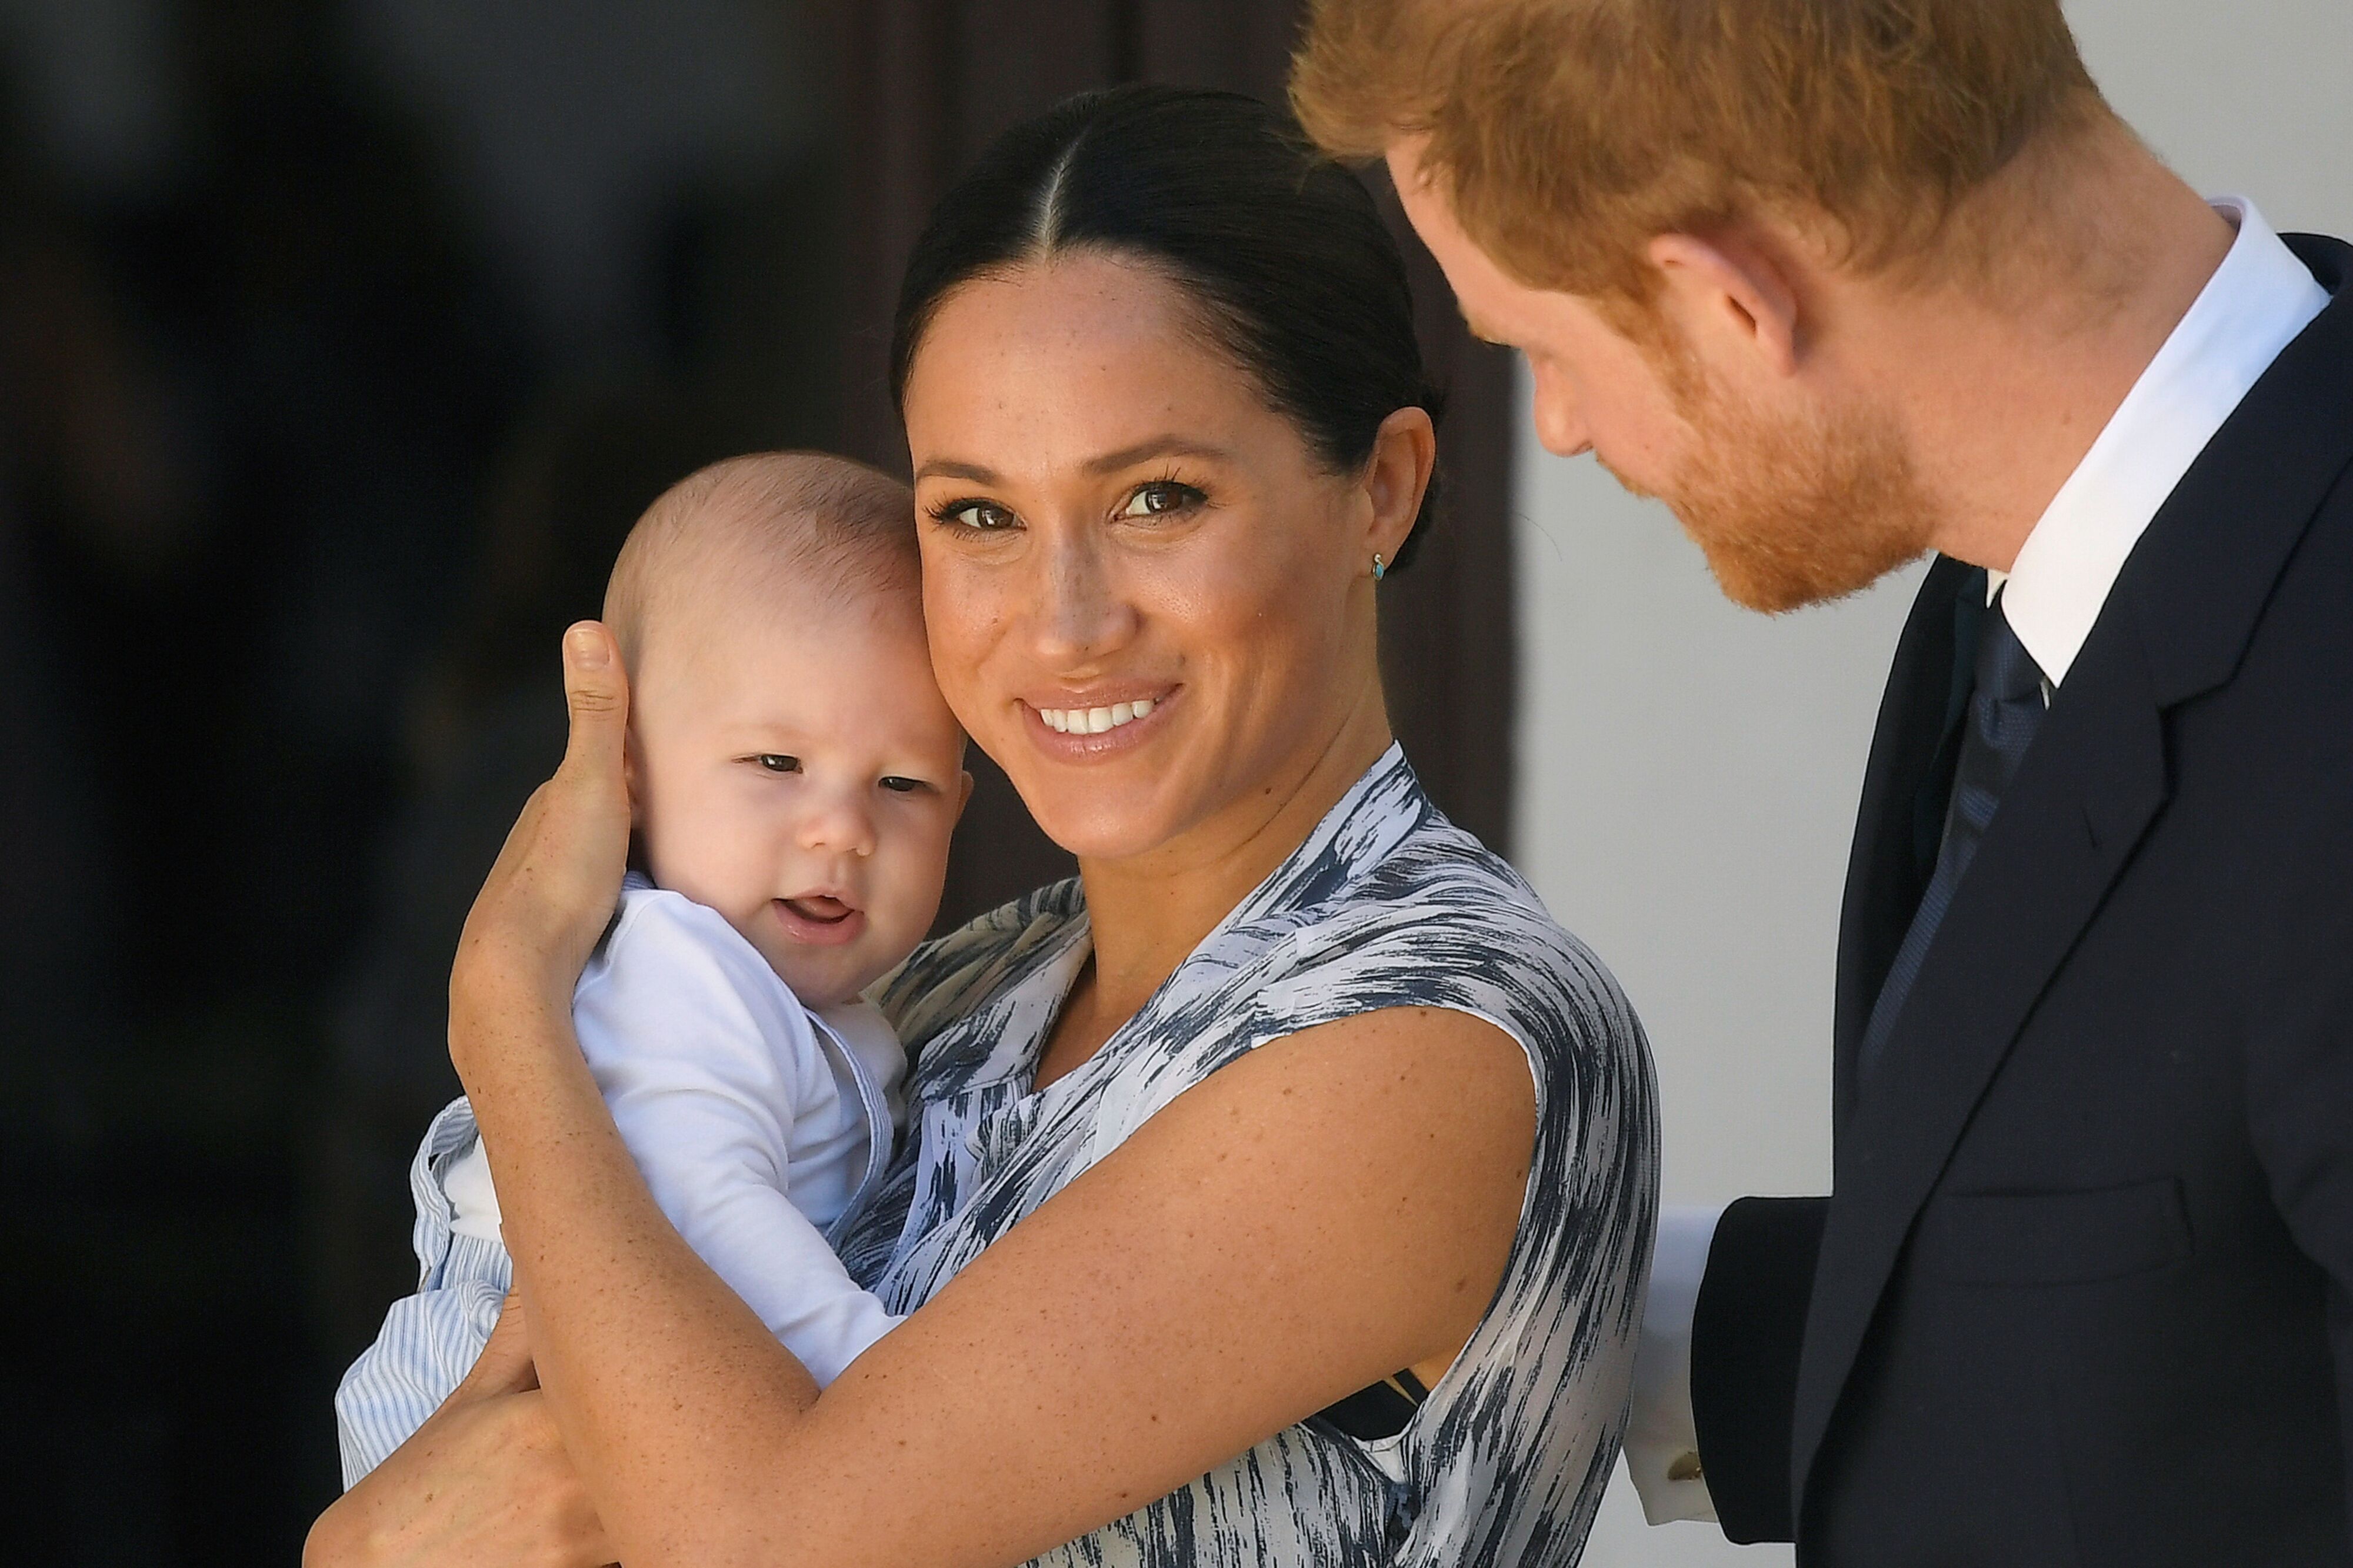 Prince Harry, Duke of Sussex, Meghan, Duchess of Sussex and their baby son Archie Mountbatten-Windsor meet Archbishop Desmond Tutu and his daughter Thandeka Tutu-Gxashe at the Desmond & Leah Tutu Legacy Foundation during their royal tour of South Africa on September 25, 2019 | Photo: Getty Images